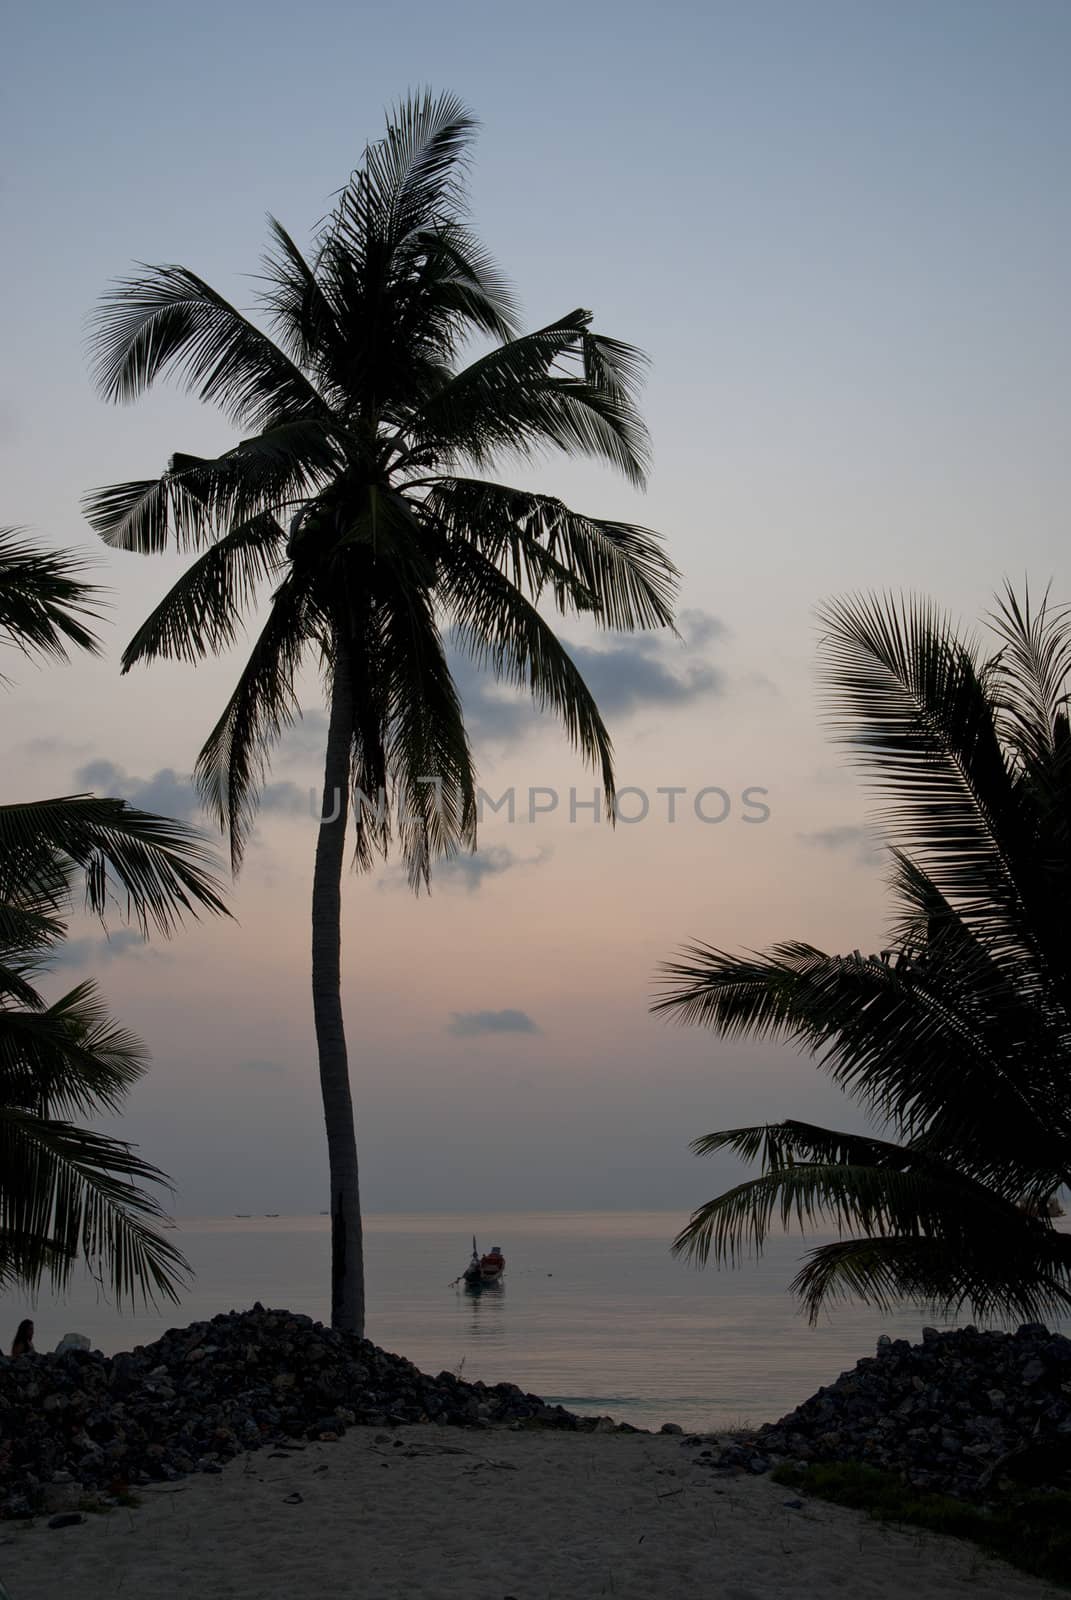 palm tree and boats at sunset on tropical island by jackmalipan